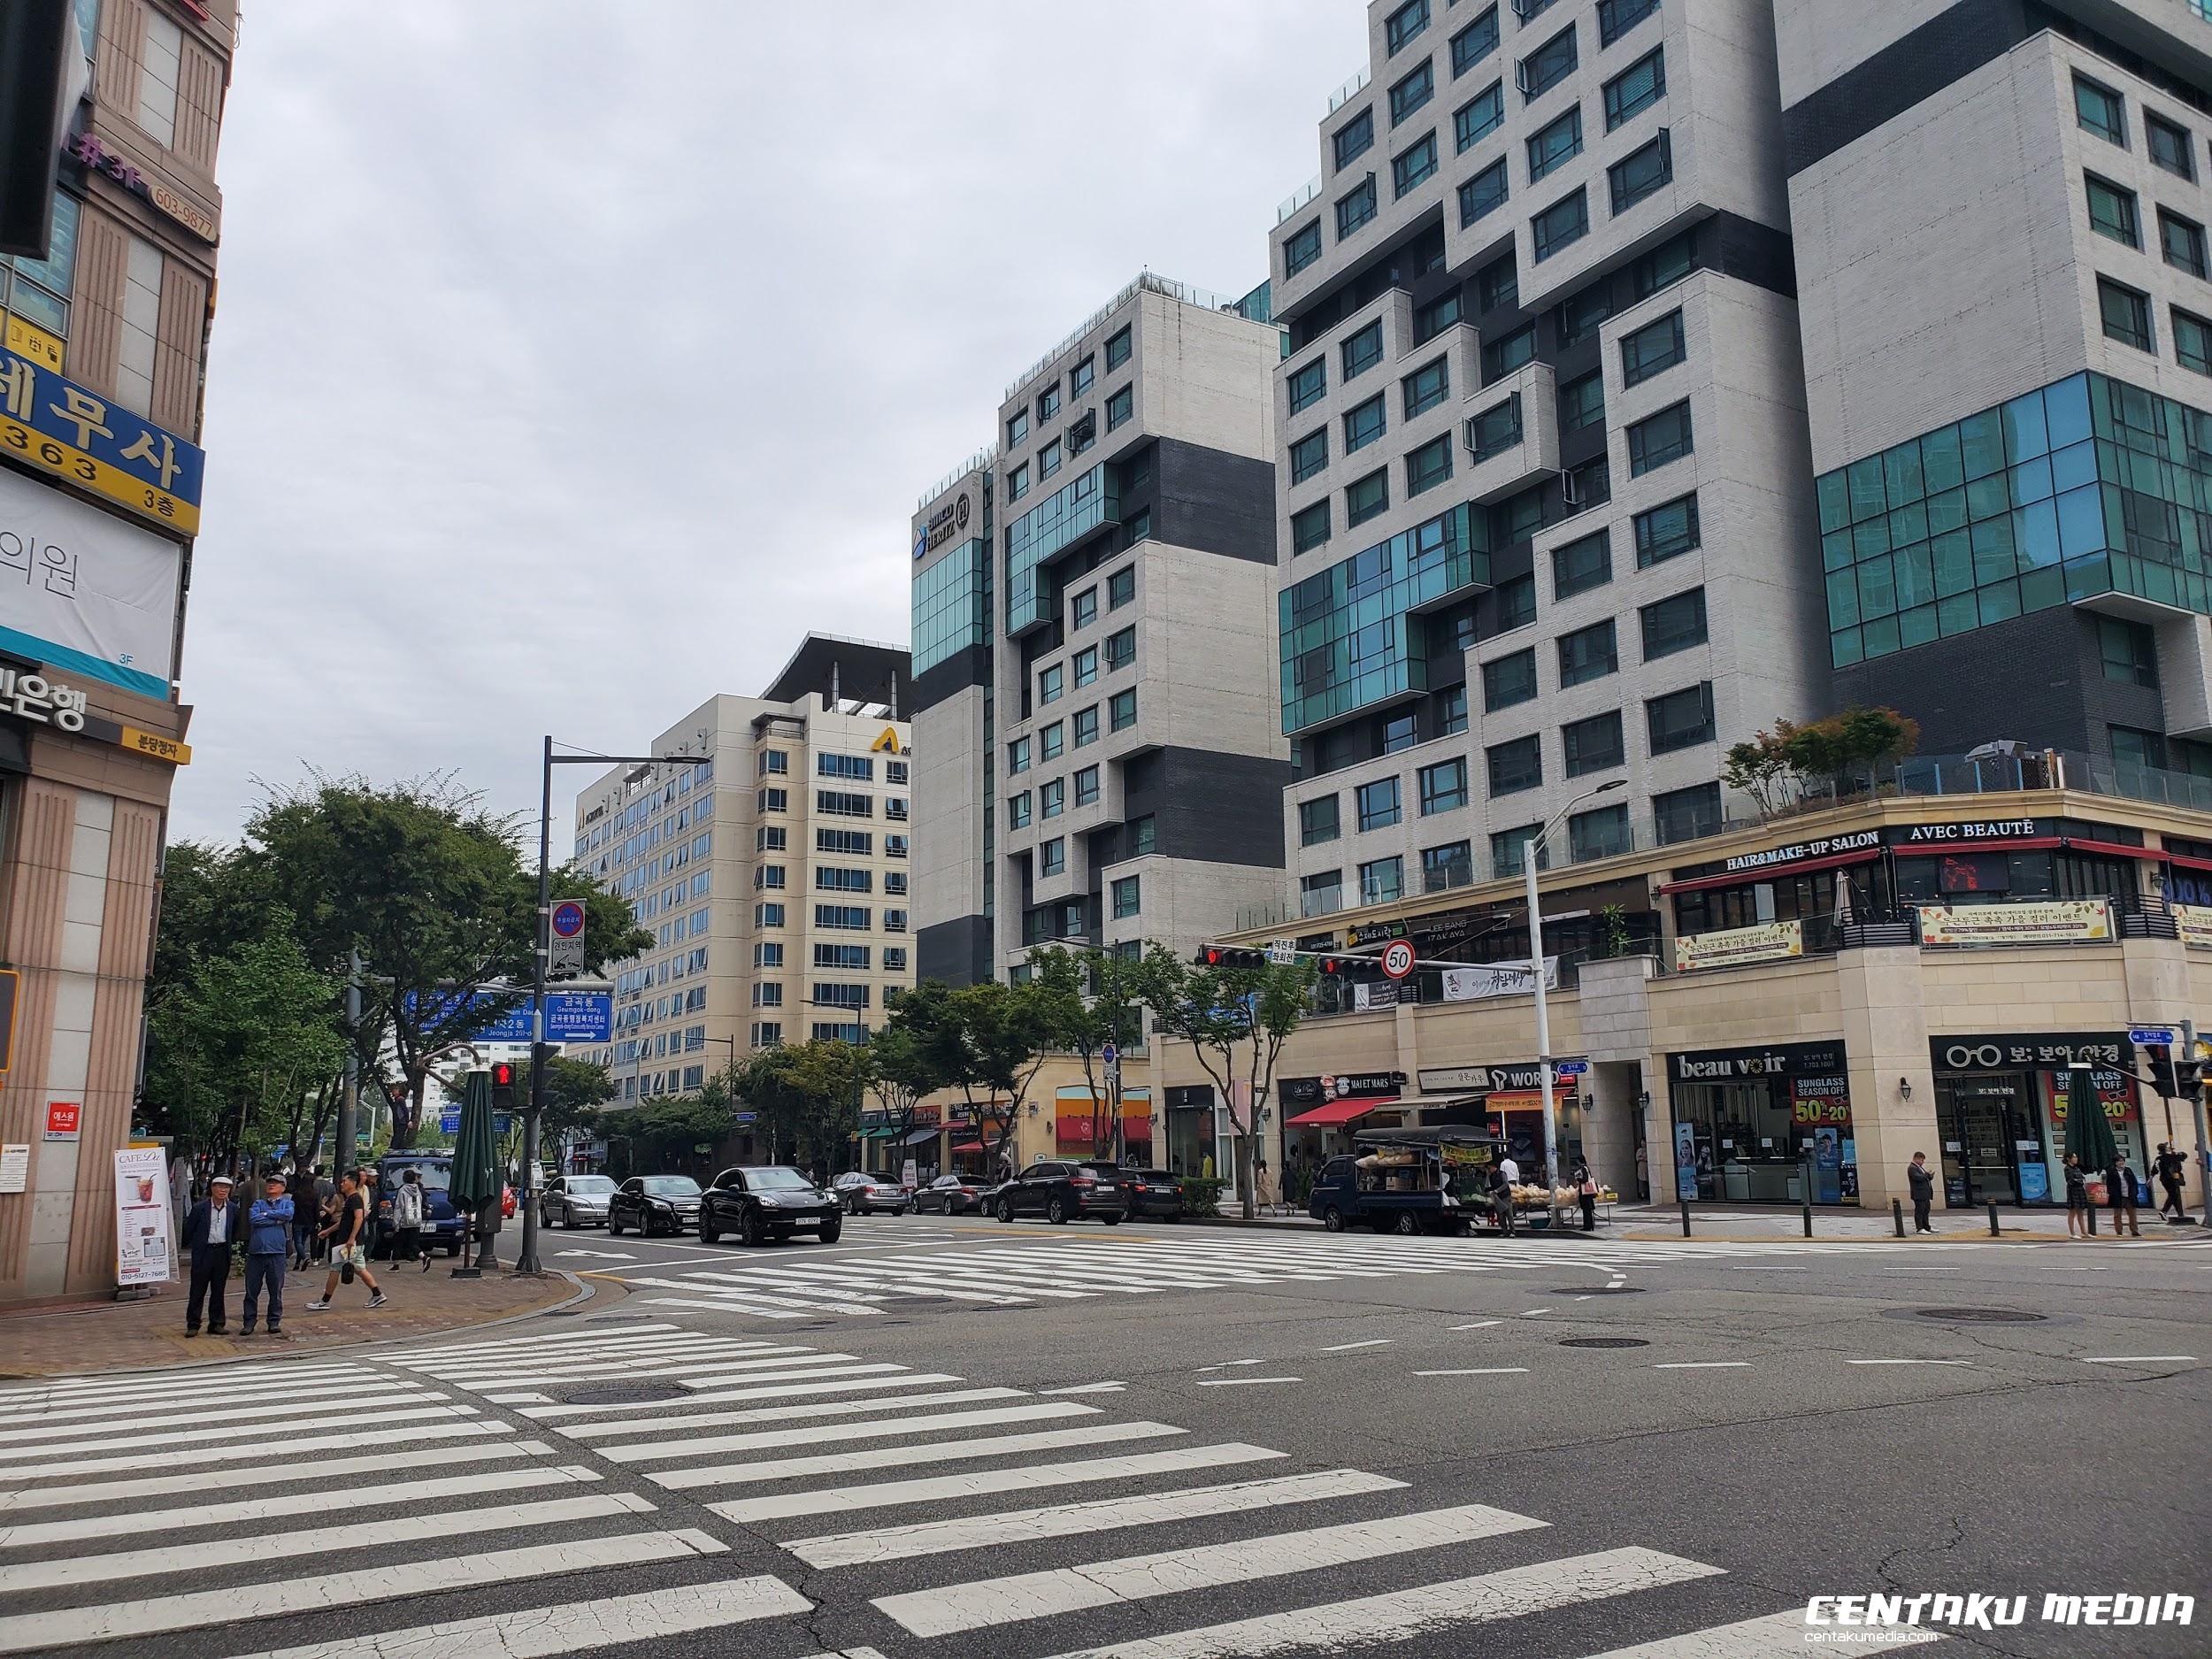 Many locally owned businesses thrive on an overcast weekday afternoon in the Seongnam area.